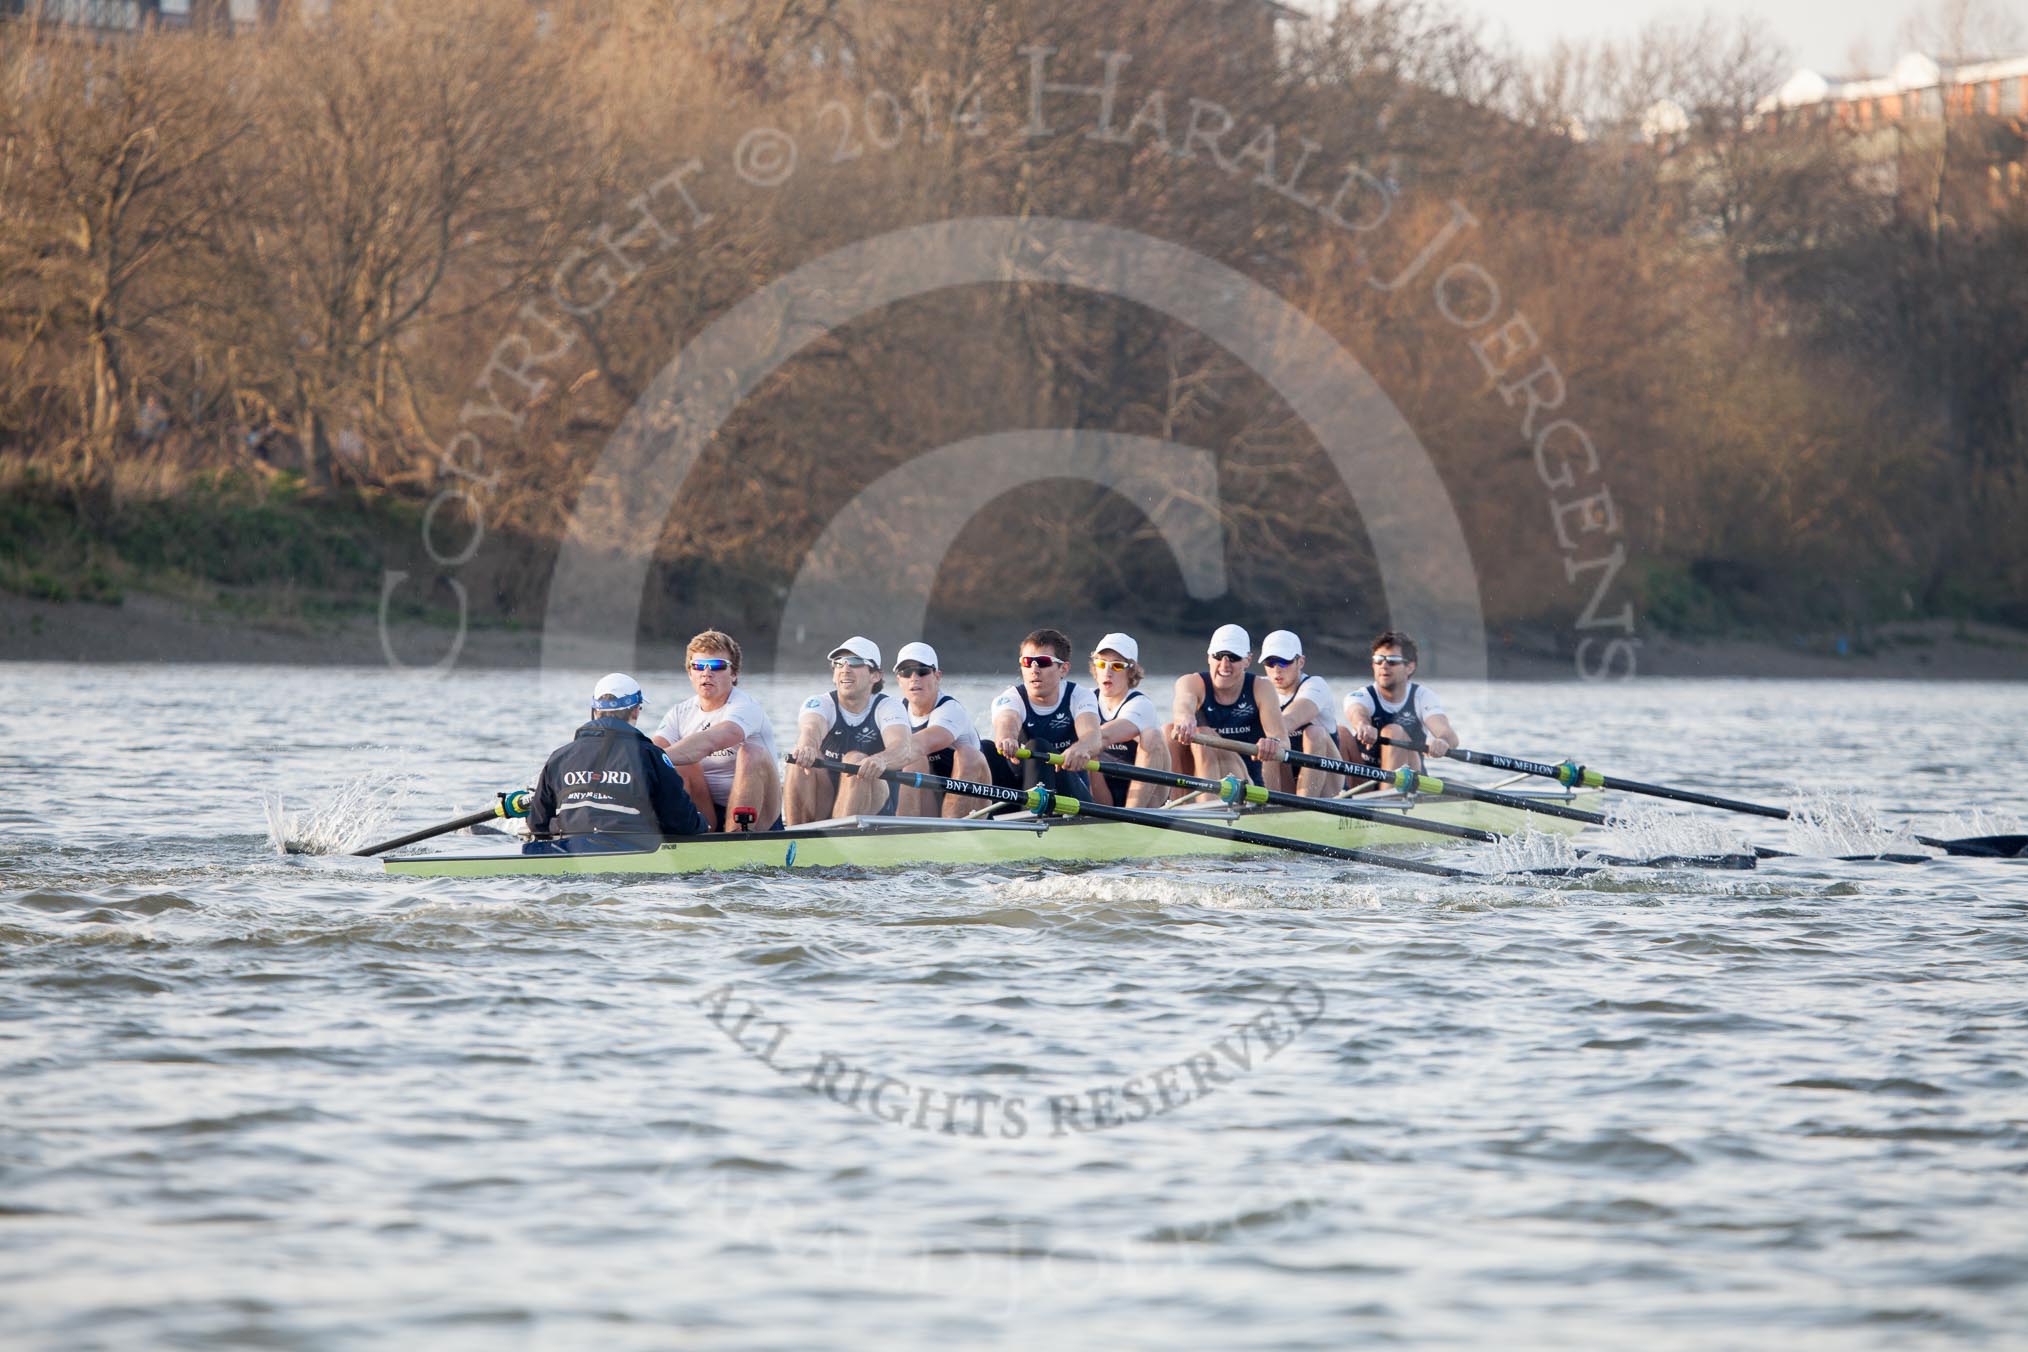 The Boat Race season 2014 - fixture OUBC vs German U23: The OUBC boat approaching the Harrods Depository..
River Thames between Putney Bridge and Chiswick Bridge,



on 08 March 2014 at 16:50, image #97